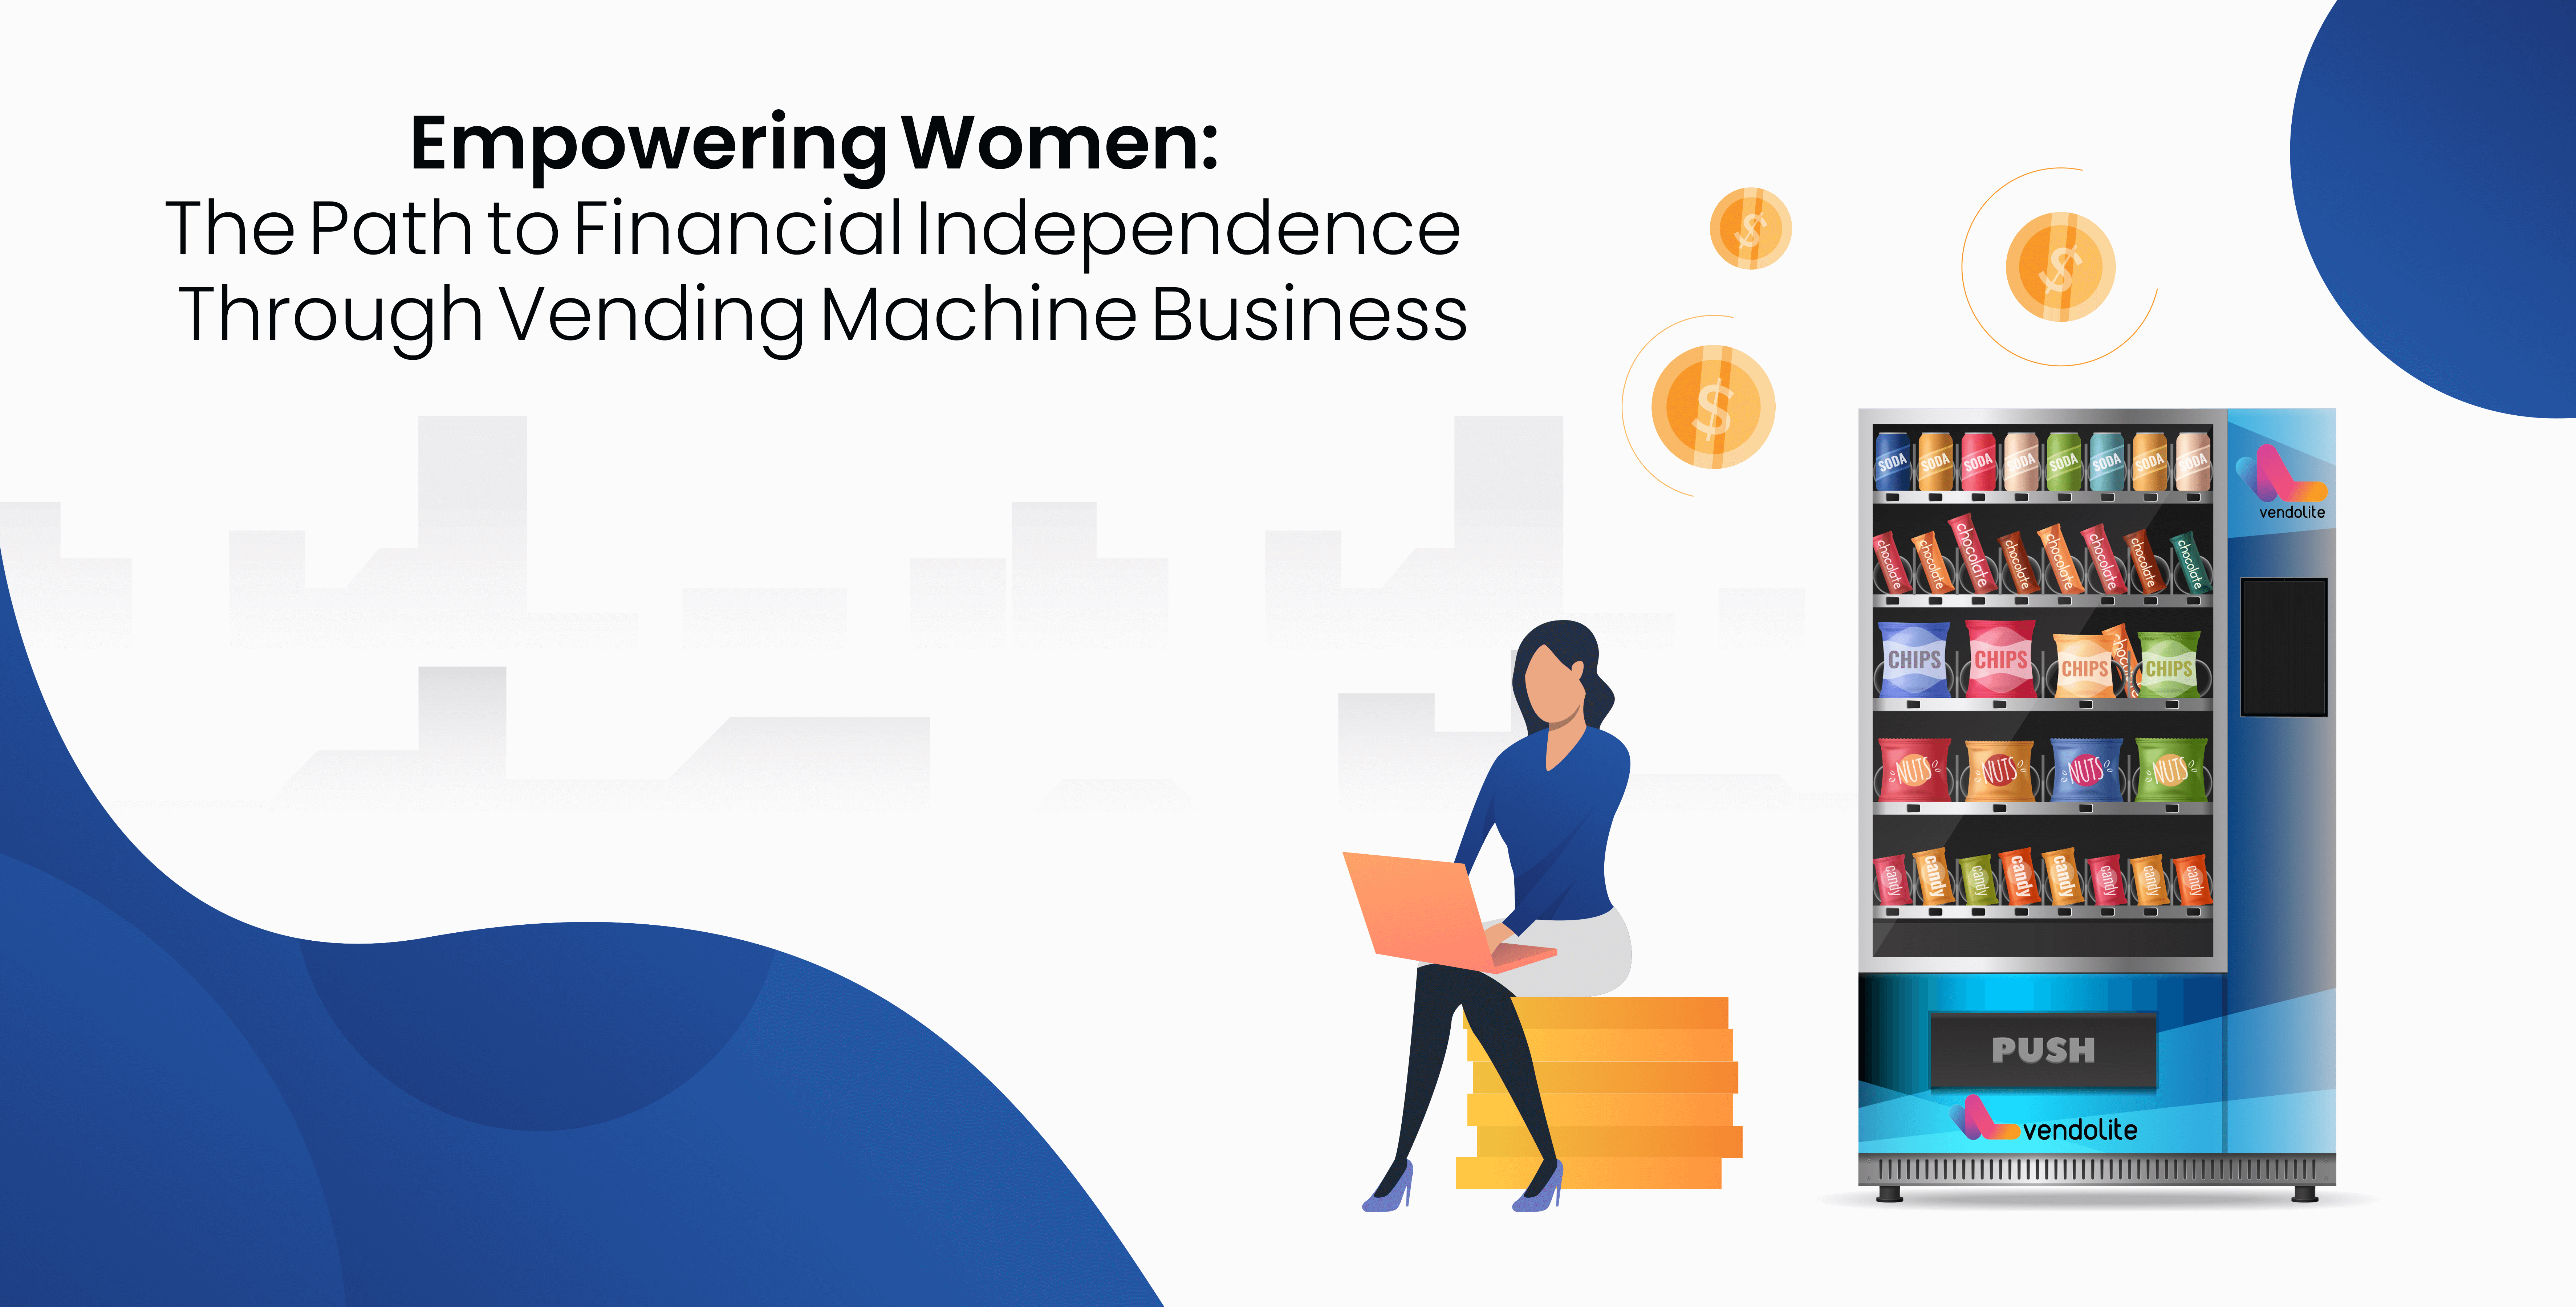 Empowering Women: The Path to Financial Independence Through Vending Machine Business